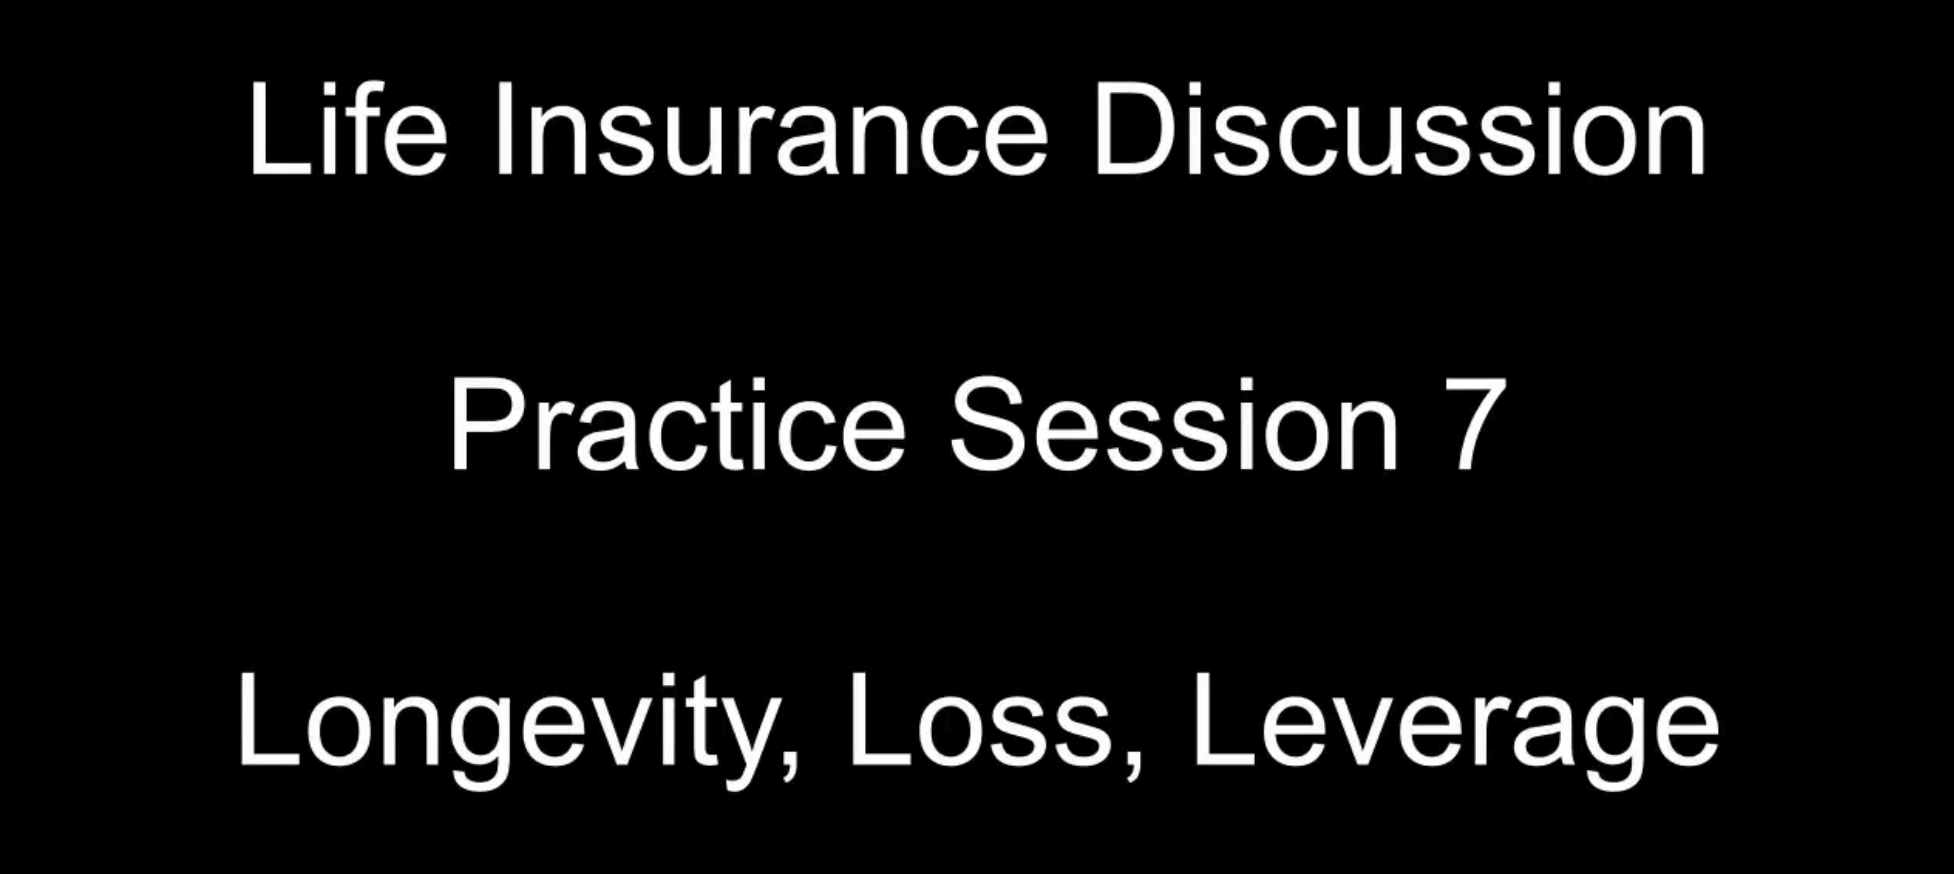 life-insurance-discussion-practice-session-seven